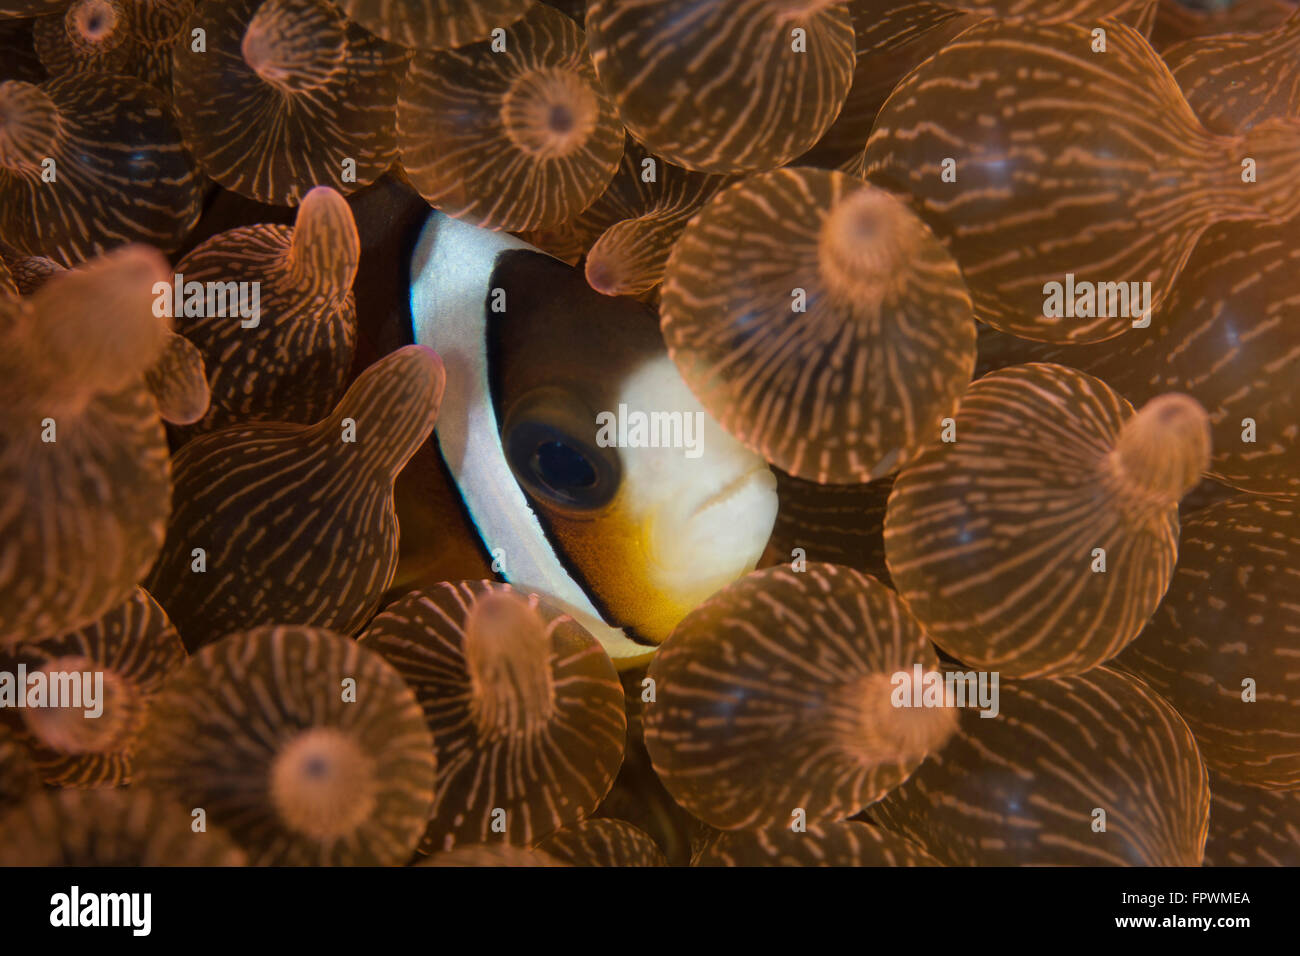 A Clark's anemonefish (Amphiprion clarkii) snuggles into the tentacles of its host anemone in Komodo National Park, Indonesia. T Stock Photo